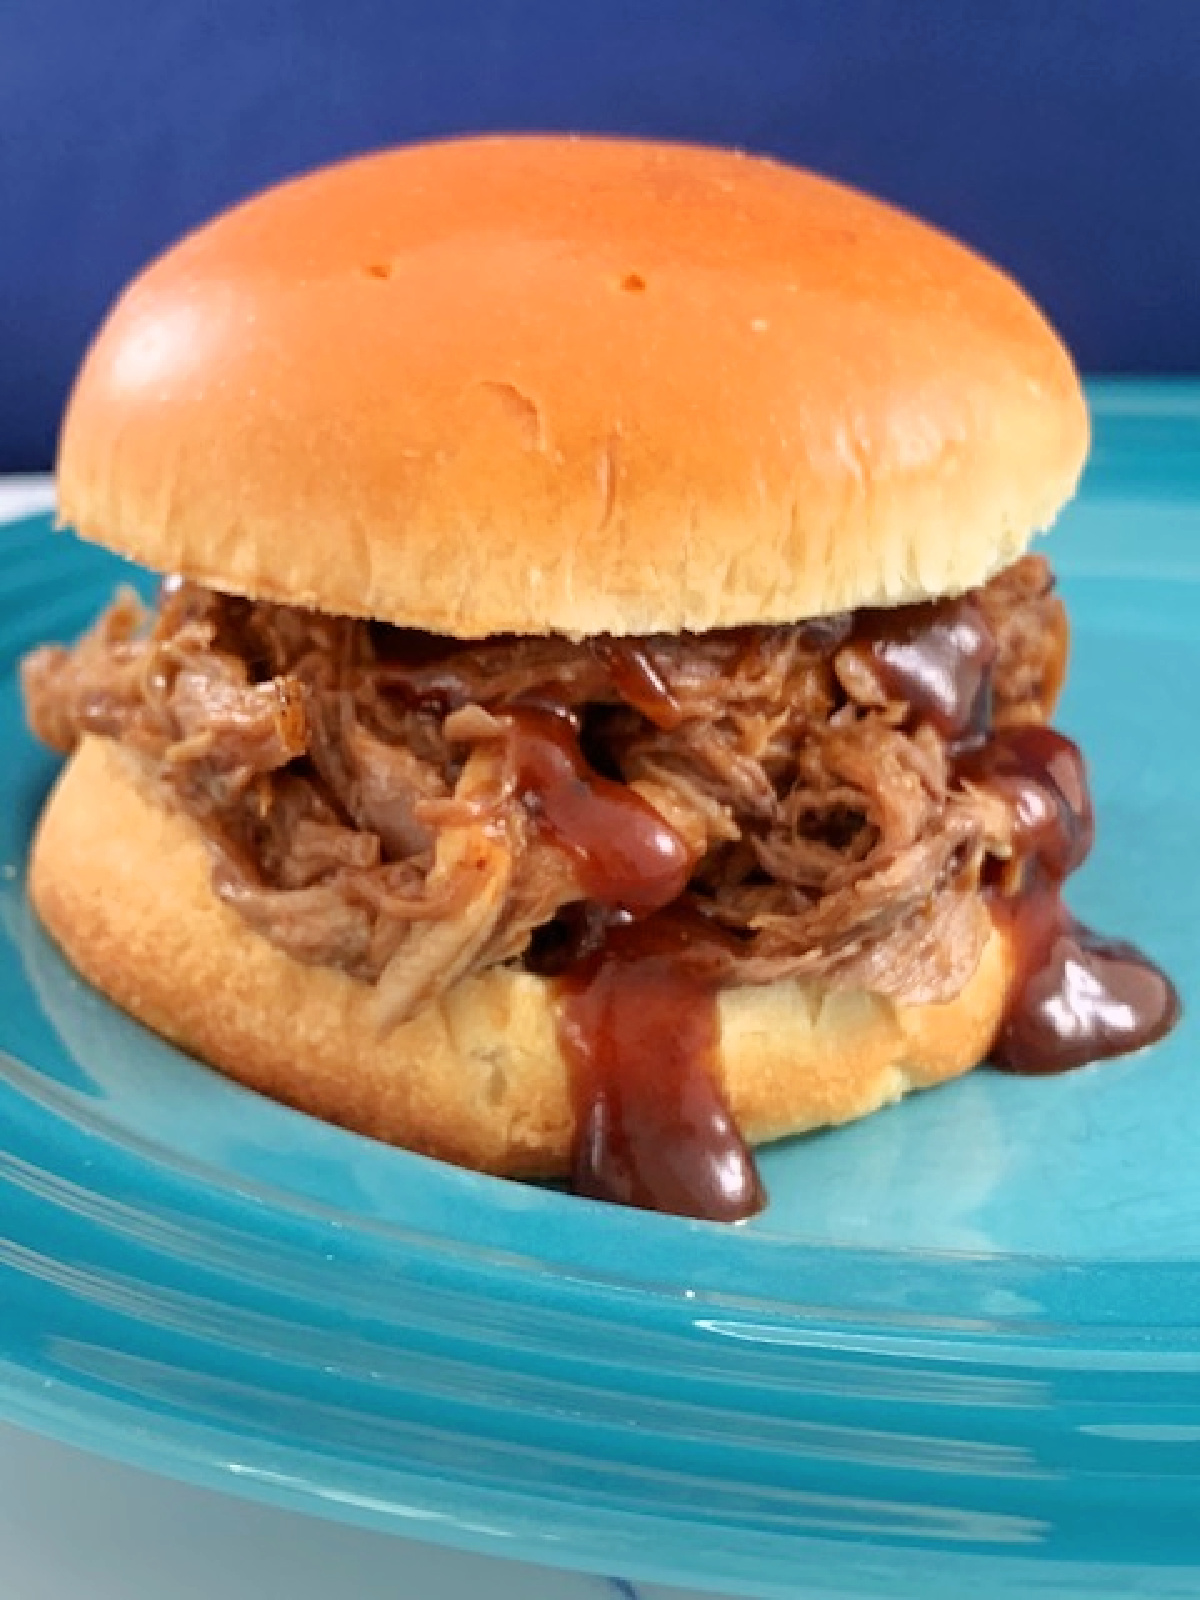 Side view of a pulled pork sandwich with barbecue sauce drips.